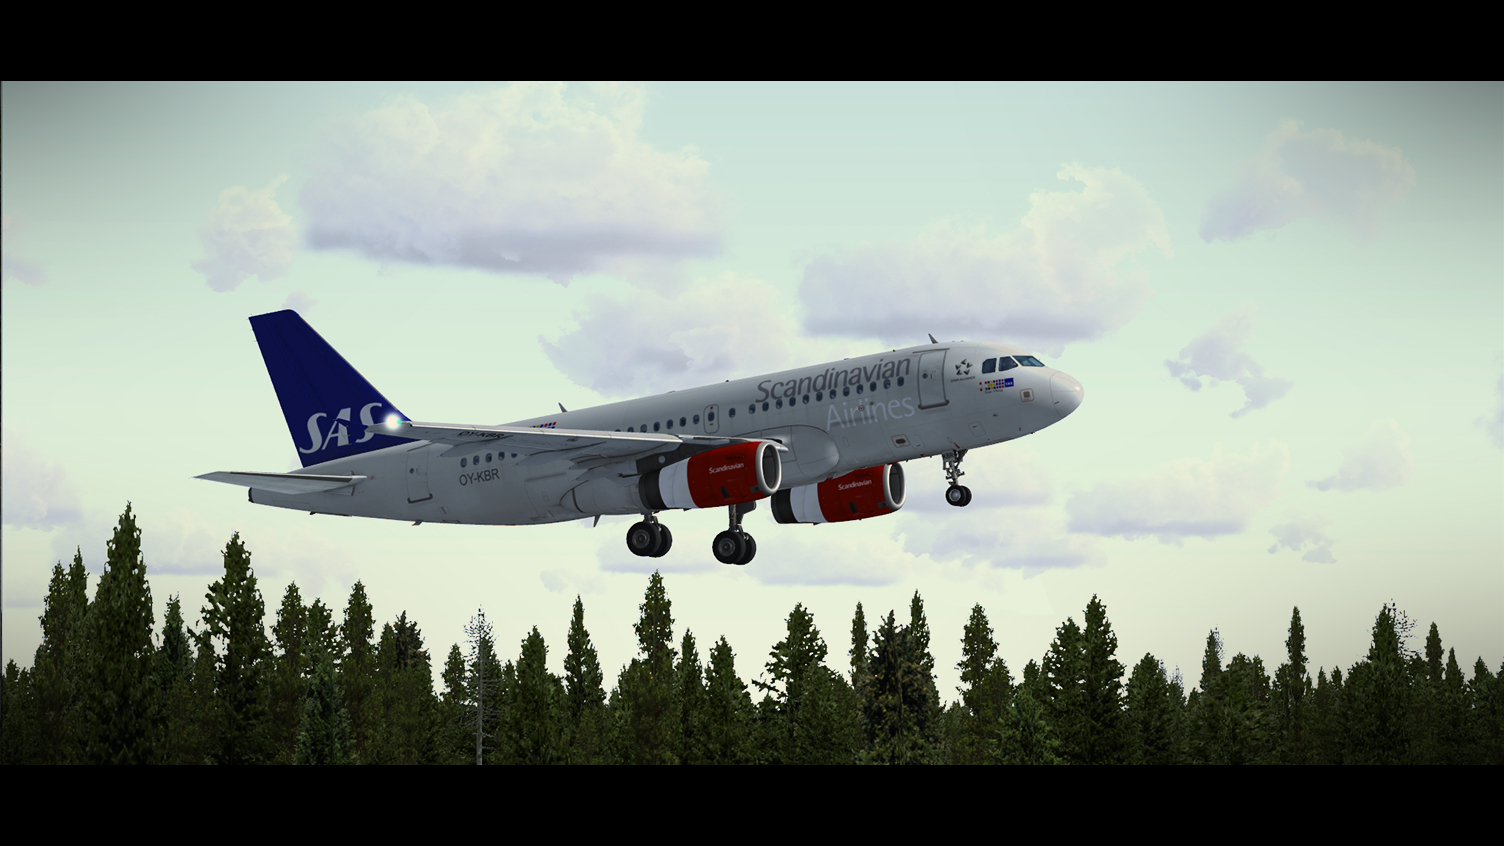 More information about "A319 CFM Scandinavian Airlines OY-KBR"